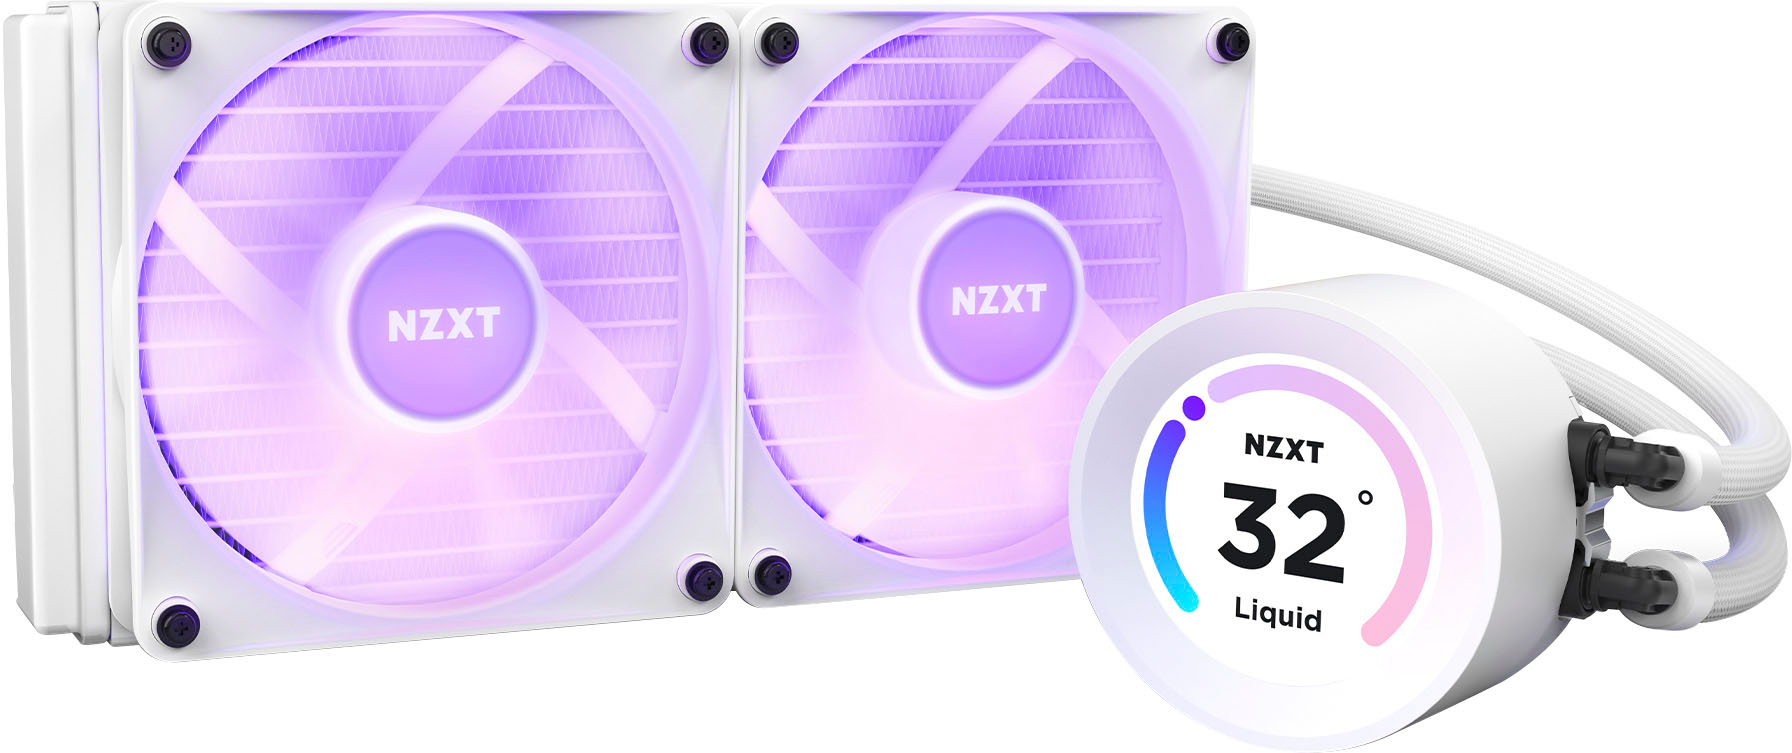 wide-angle + RGB with System display Cooling Kraken 120mm RL-KR24E-W1 Liquid Fans Fans 2.36\